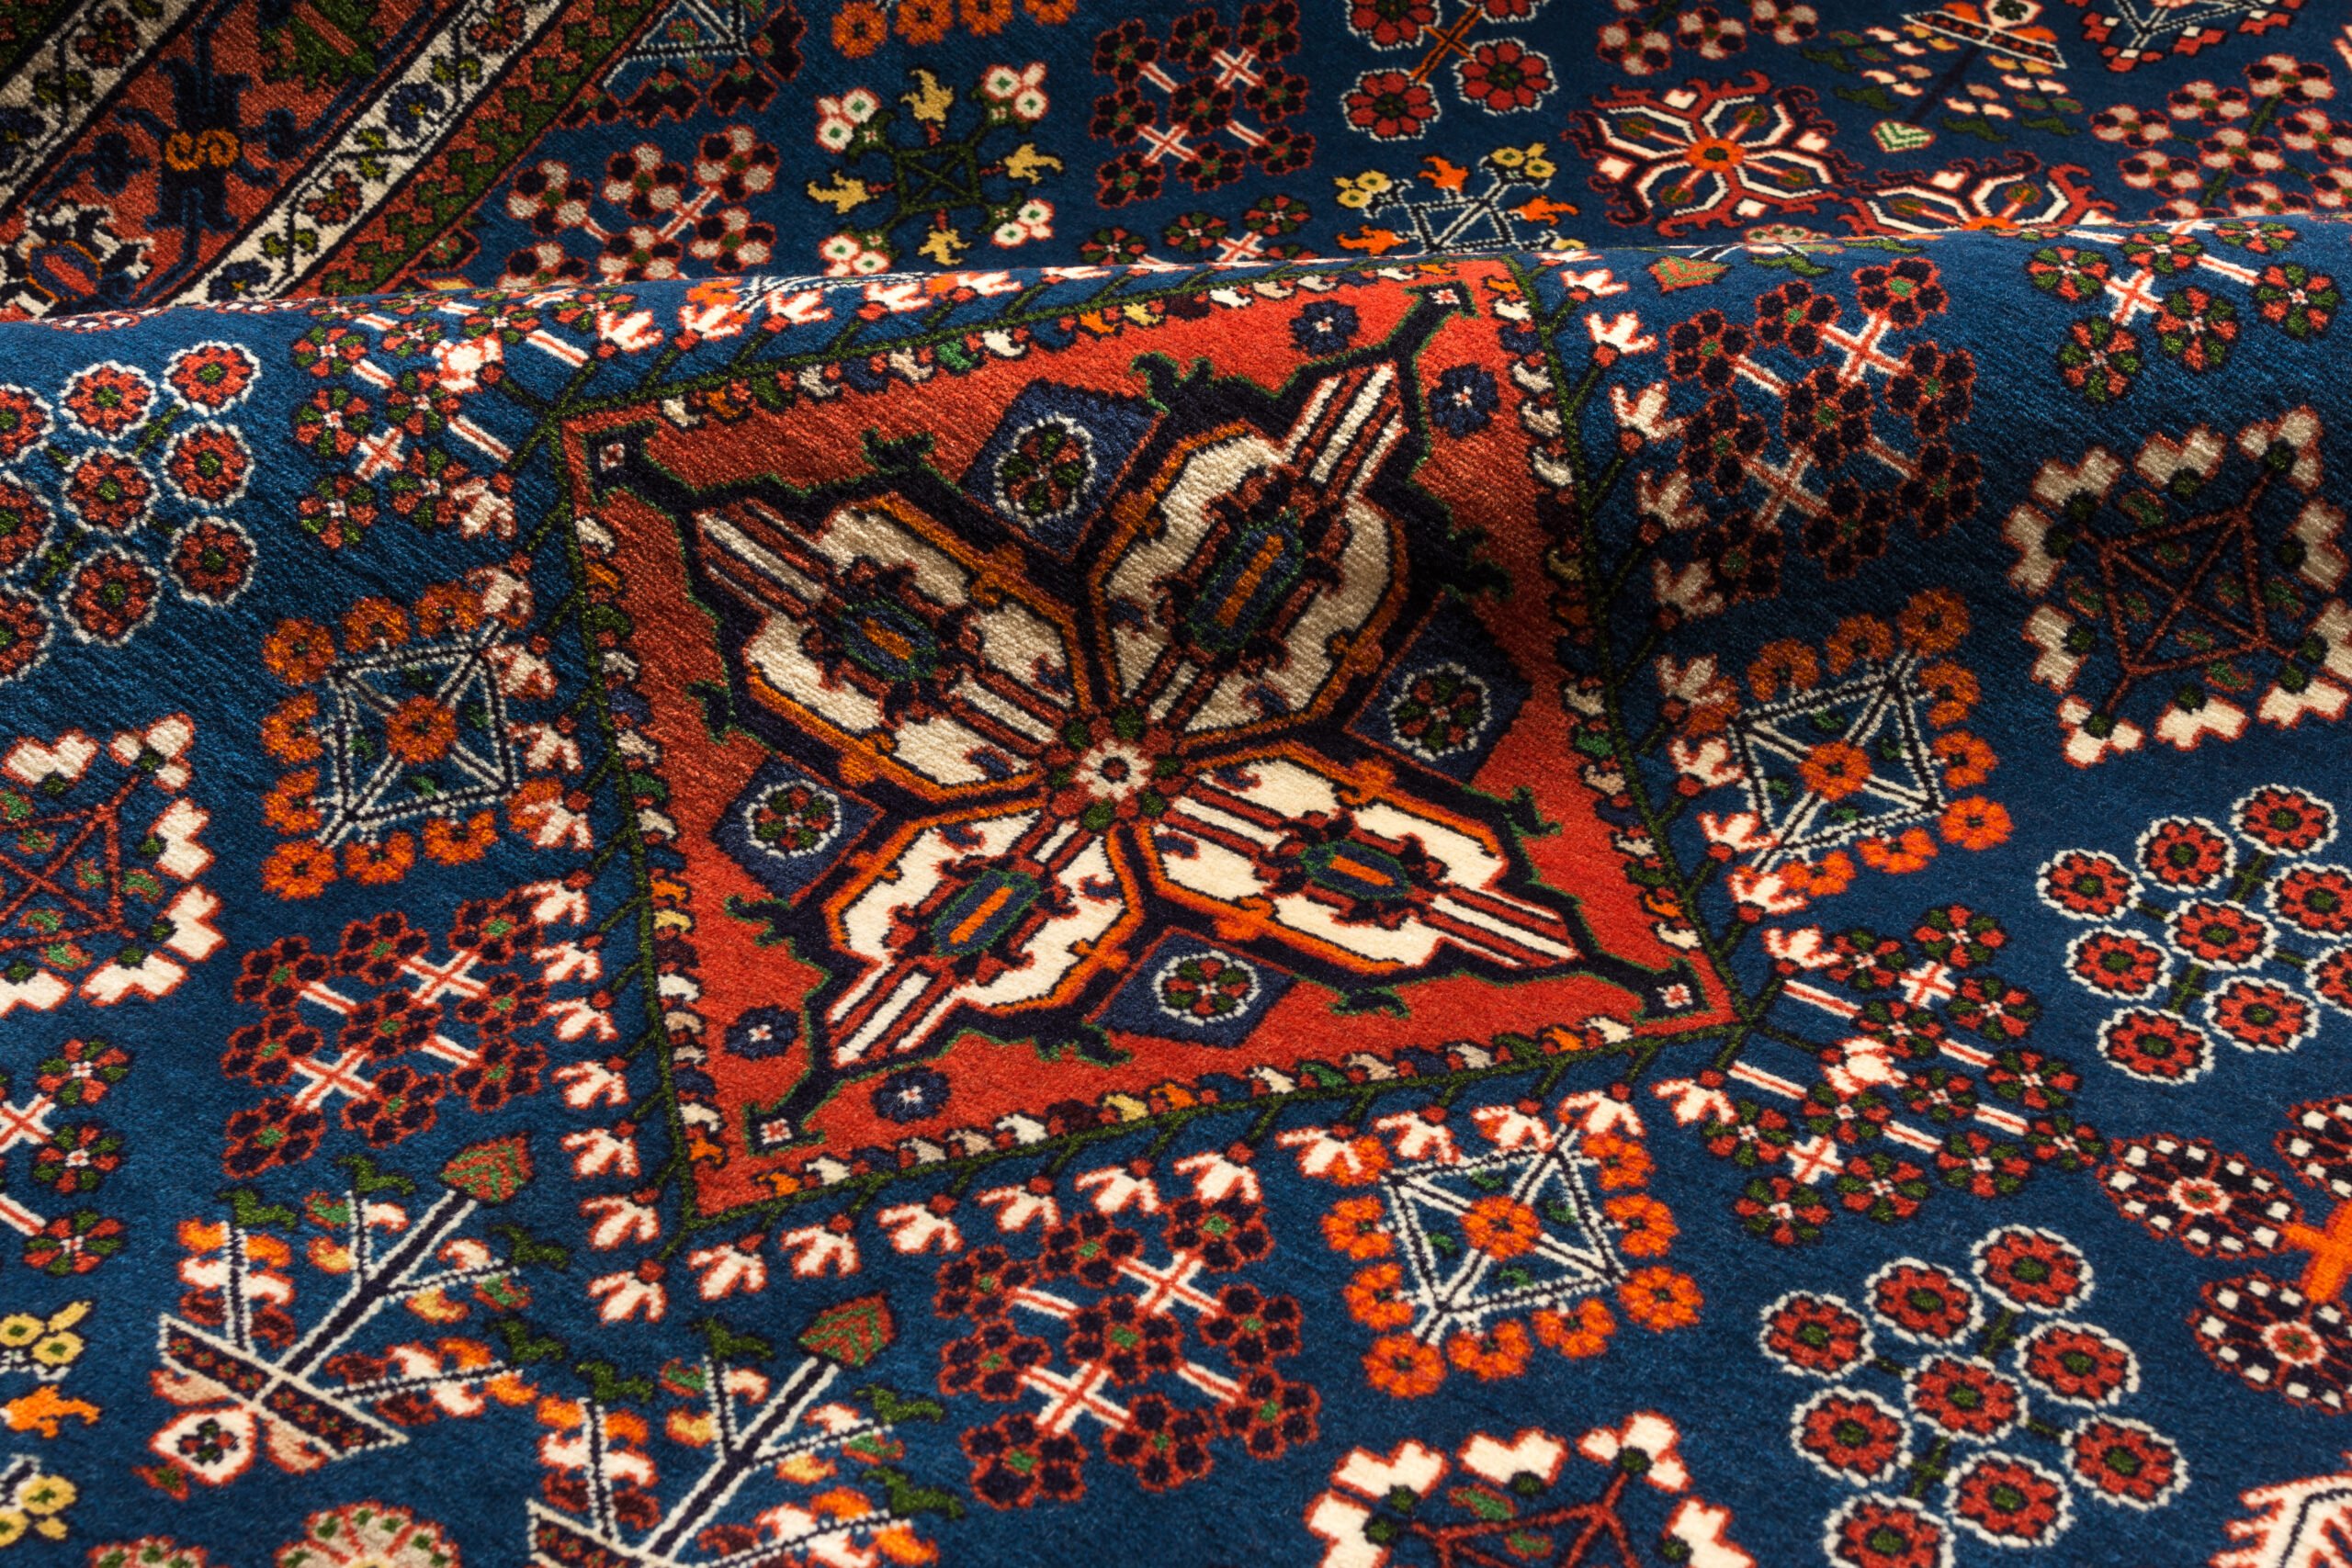 What Are Persian Rugs Made Of?